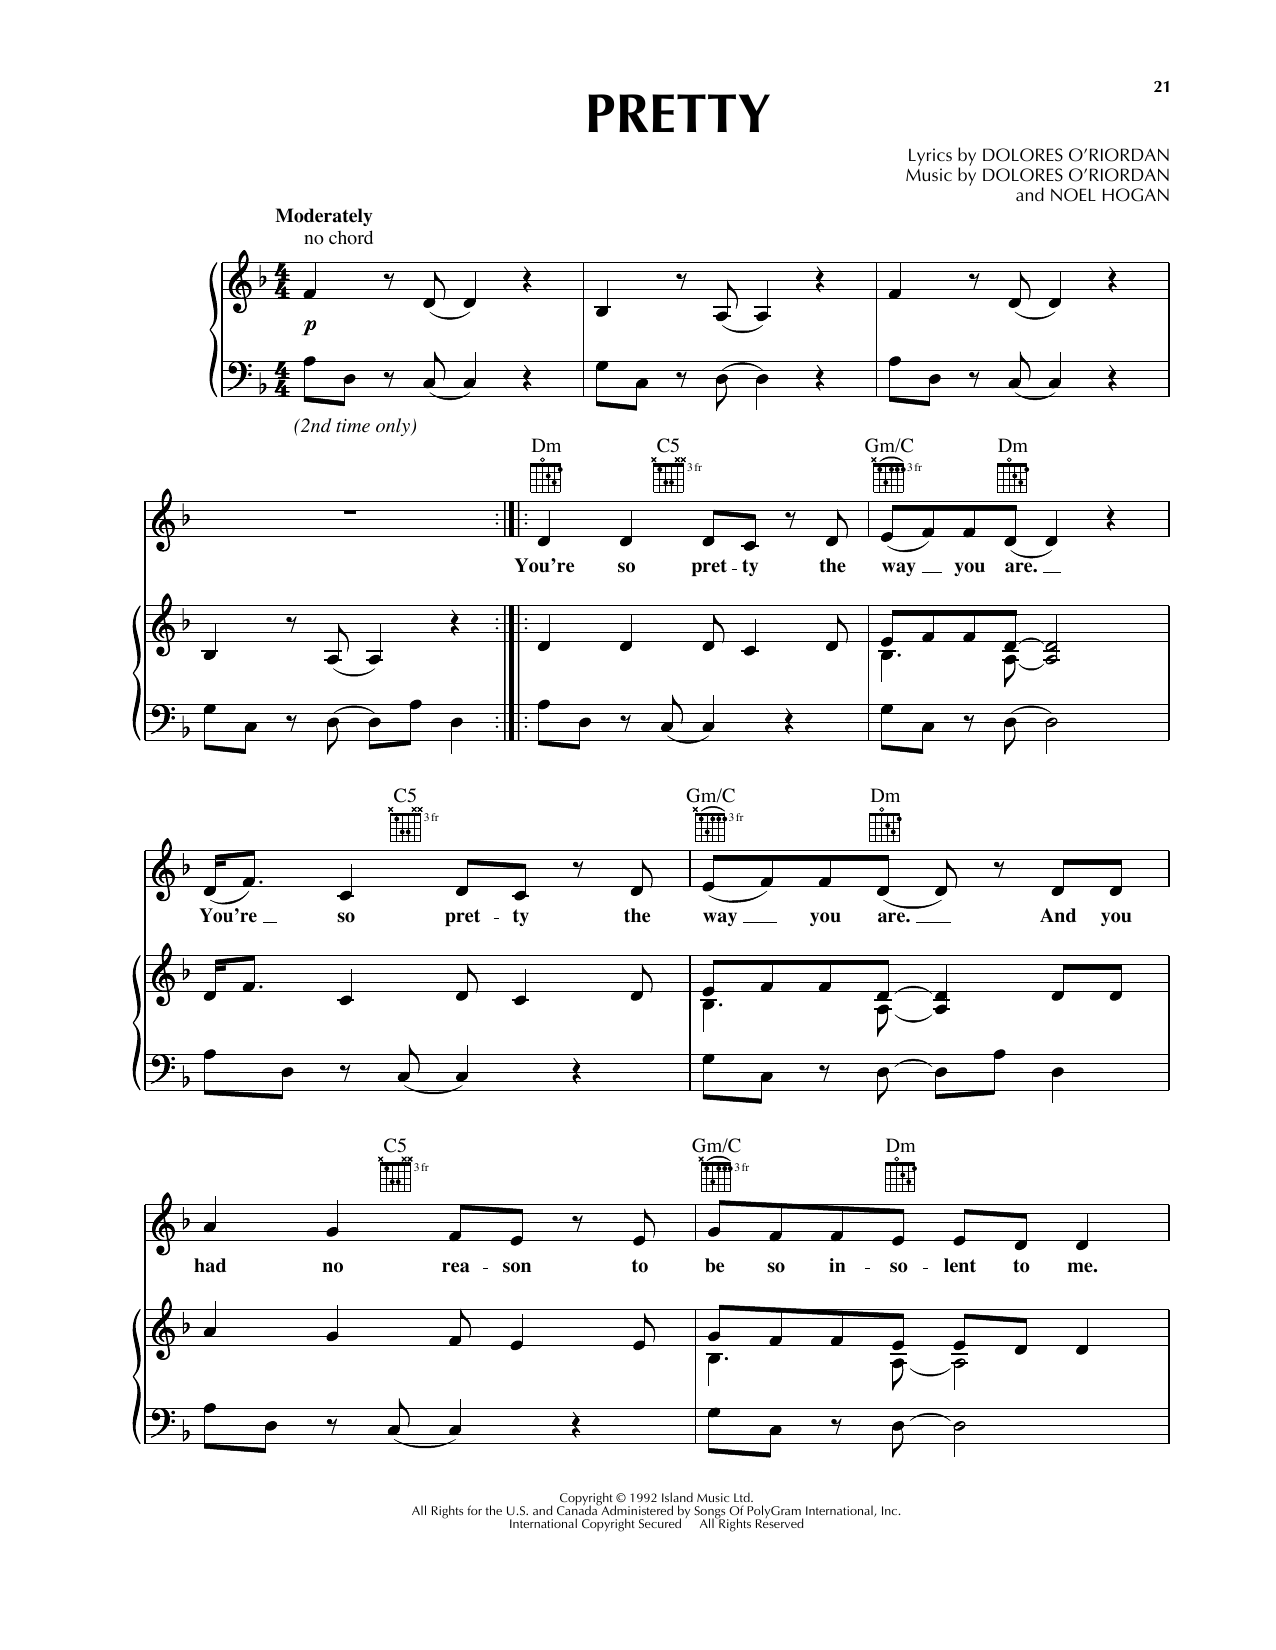 Download The Cranberries Pretty Sheet Music